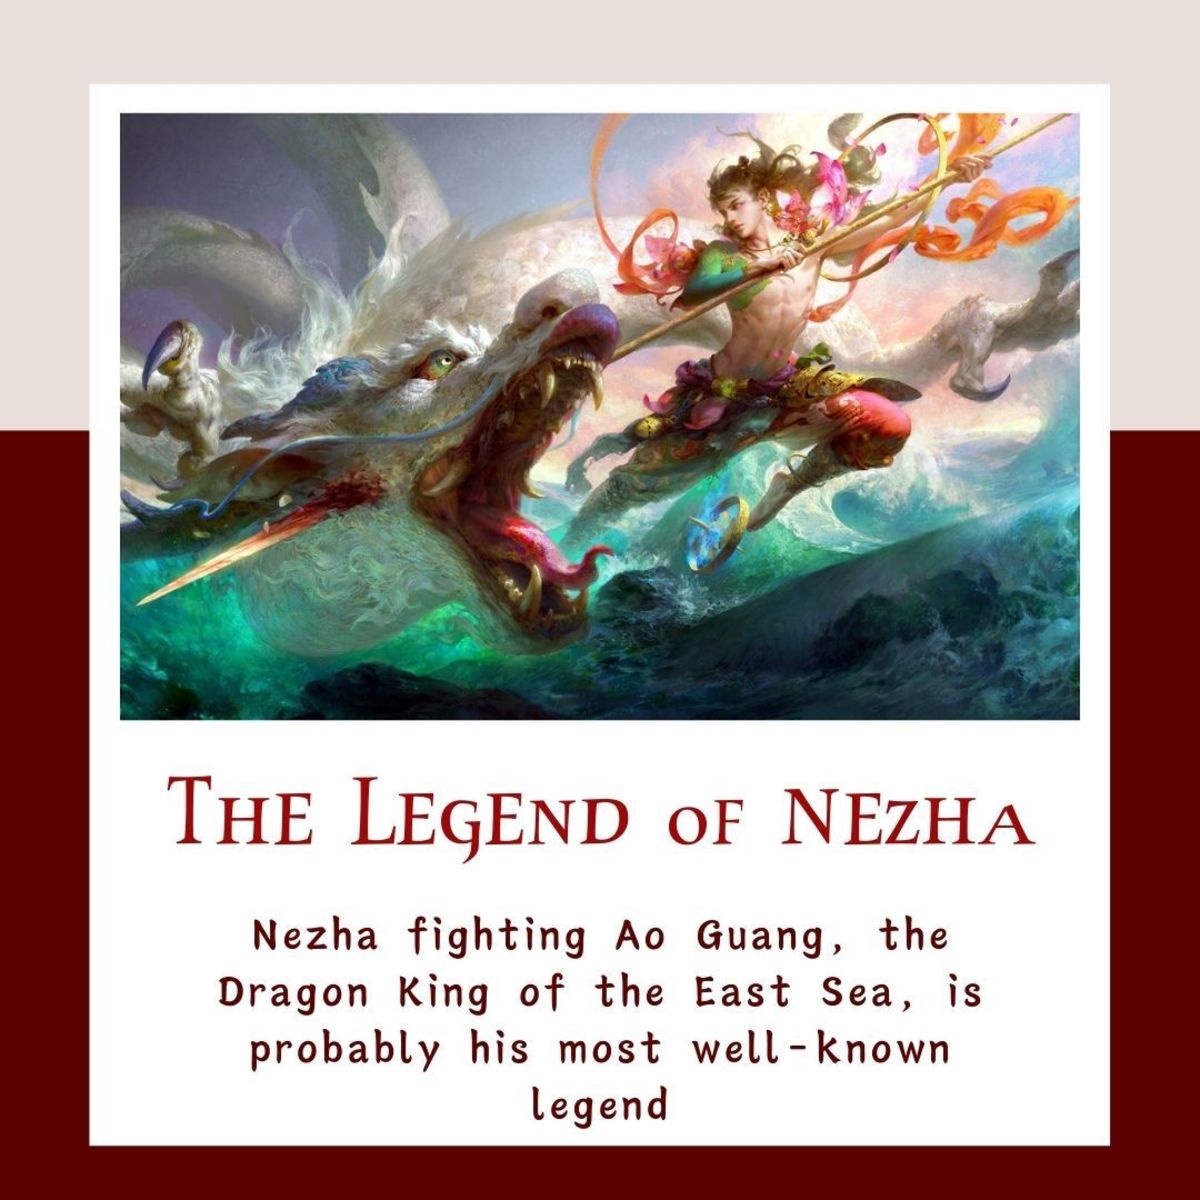 The cruel Dragon King was finally defeated by Nezha.